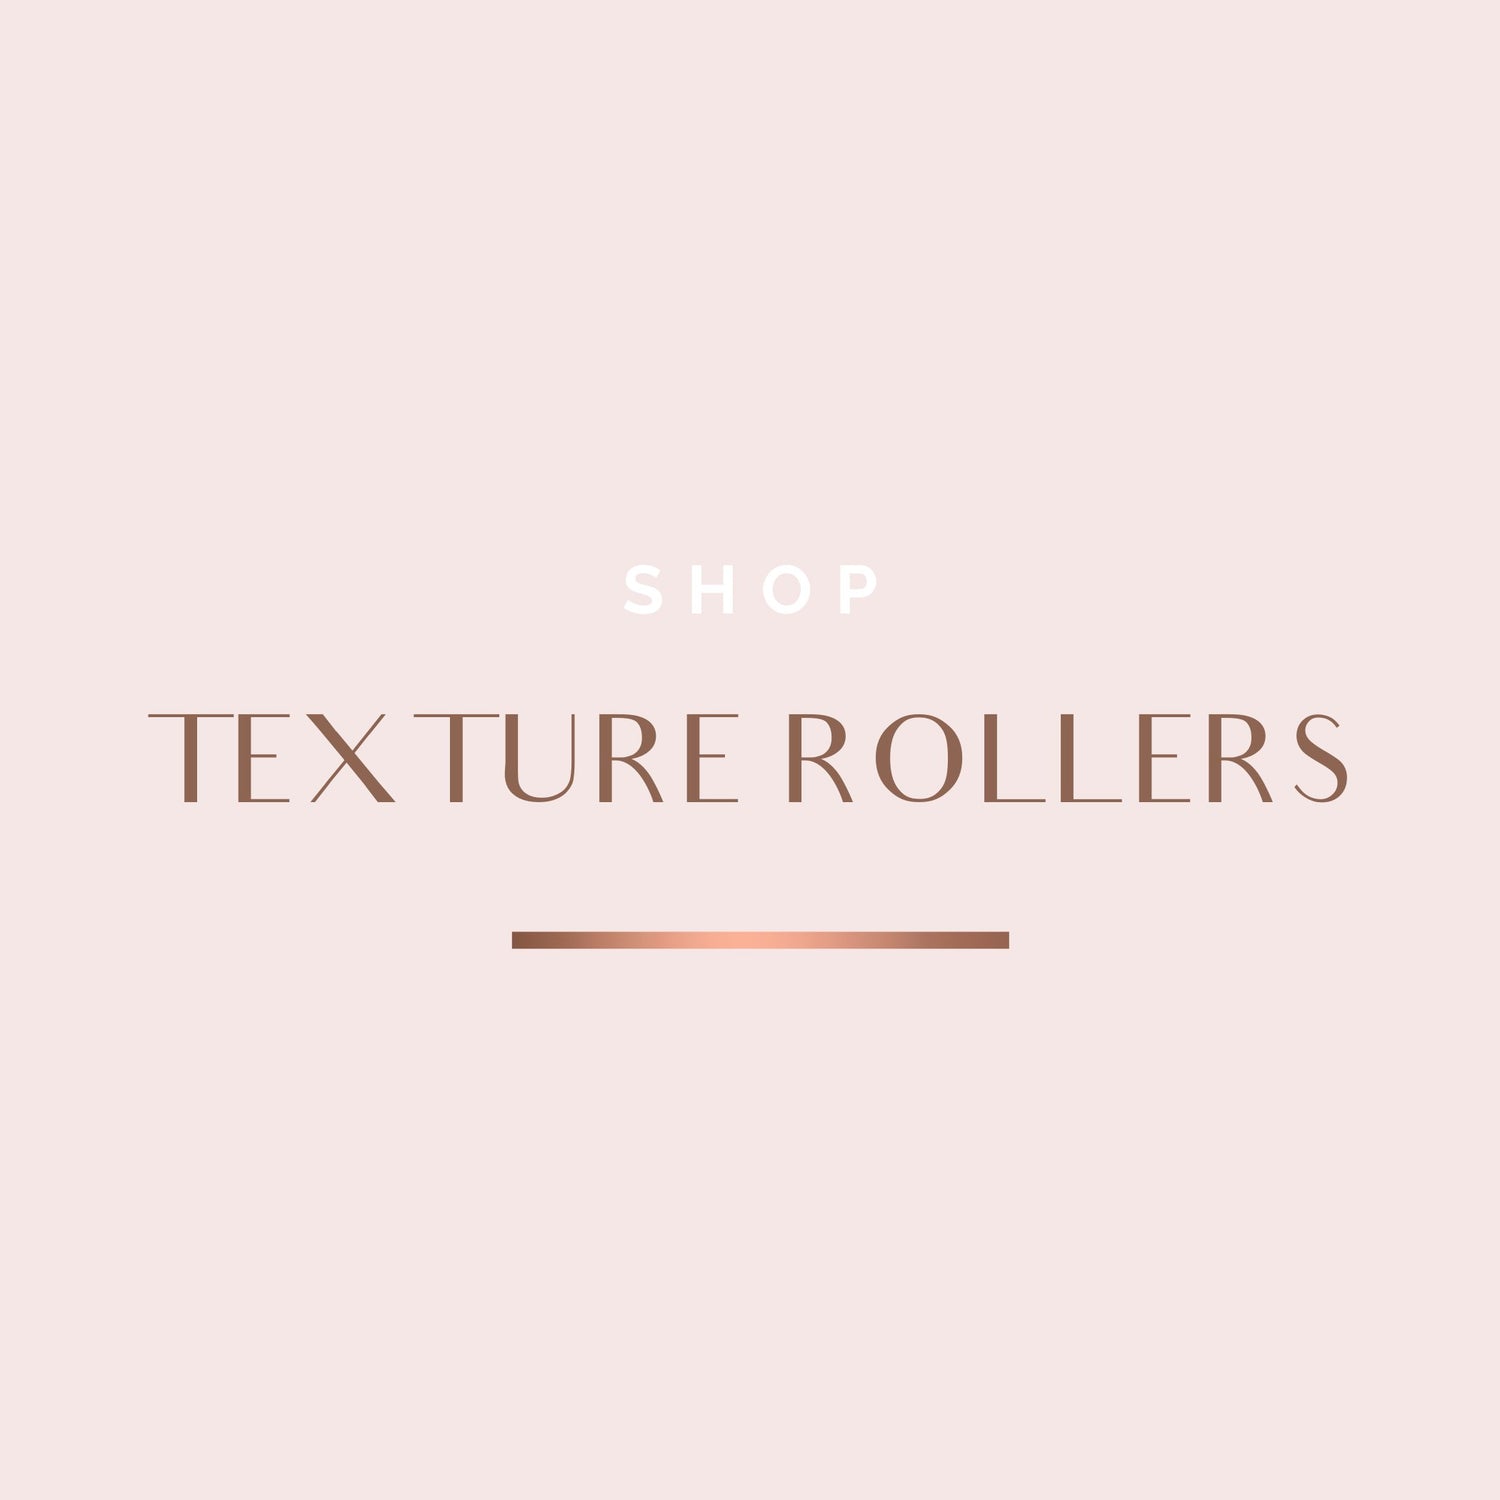 TEXTURE ROLLERS